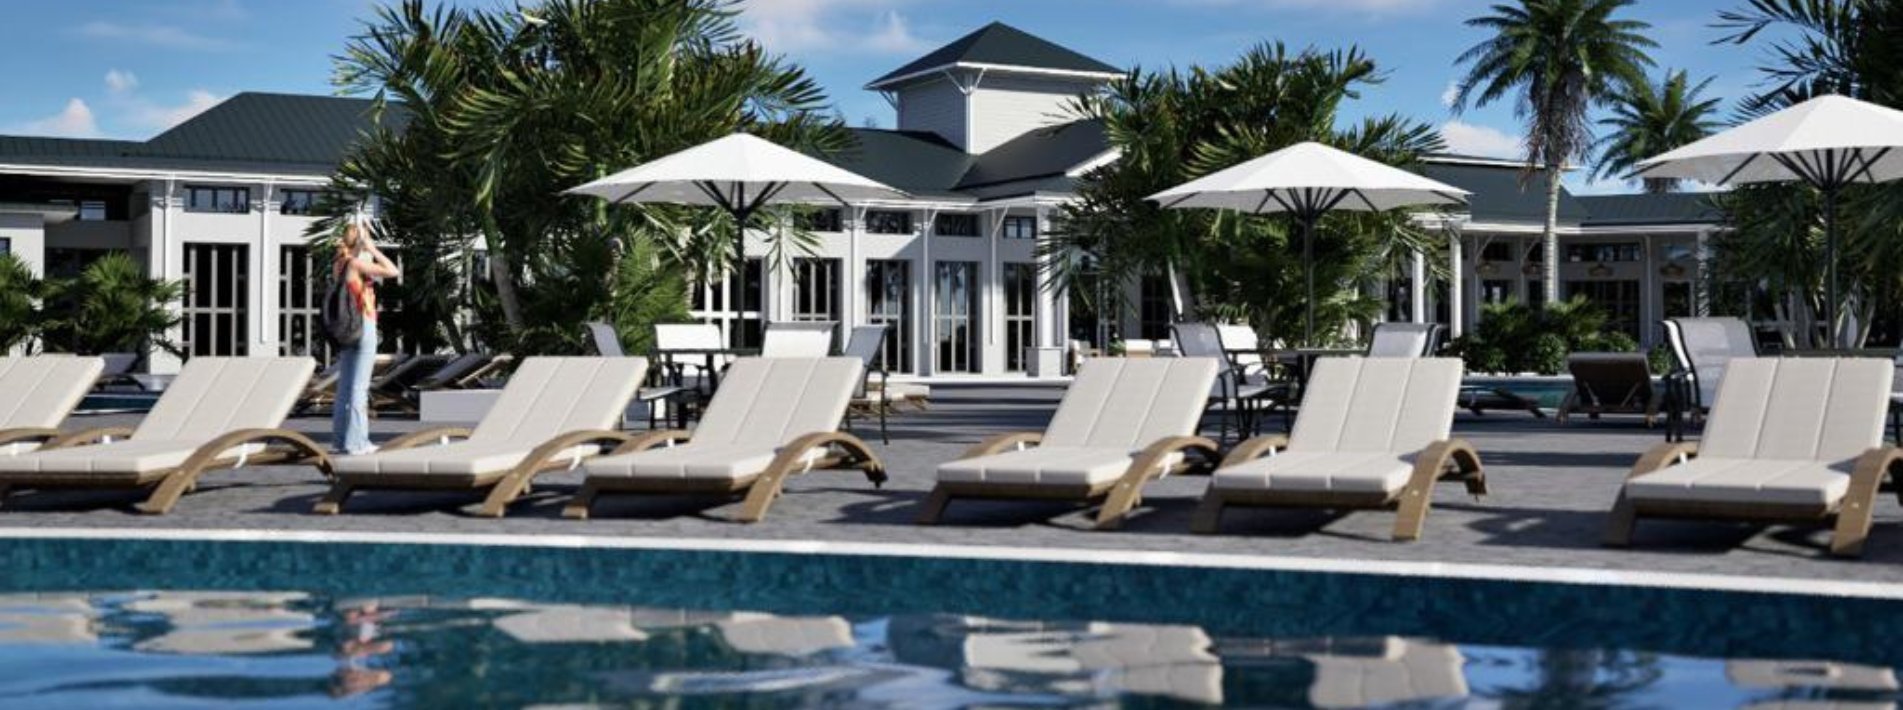 Windsor Cay Resort Vacation Property Pool